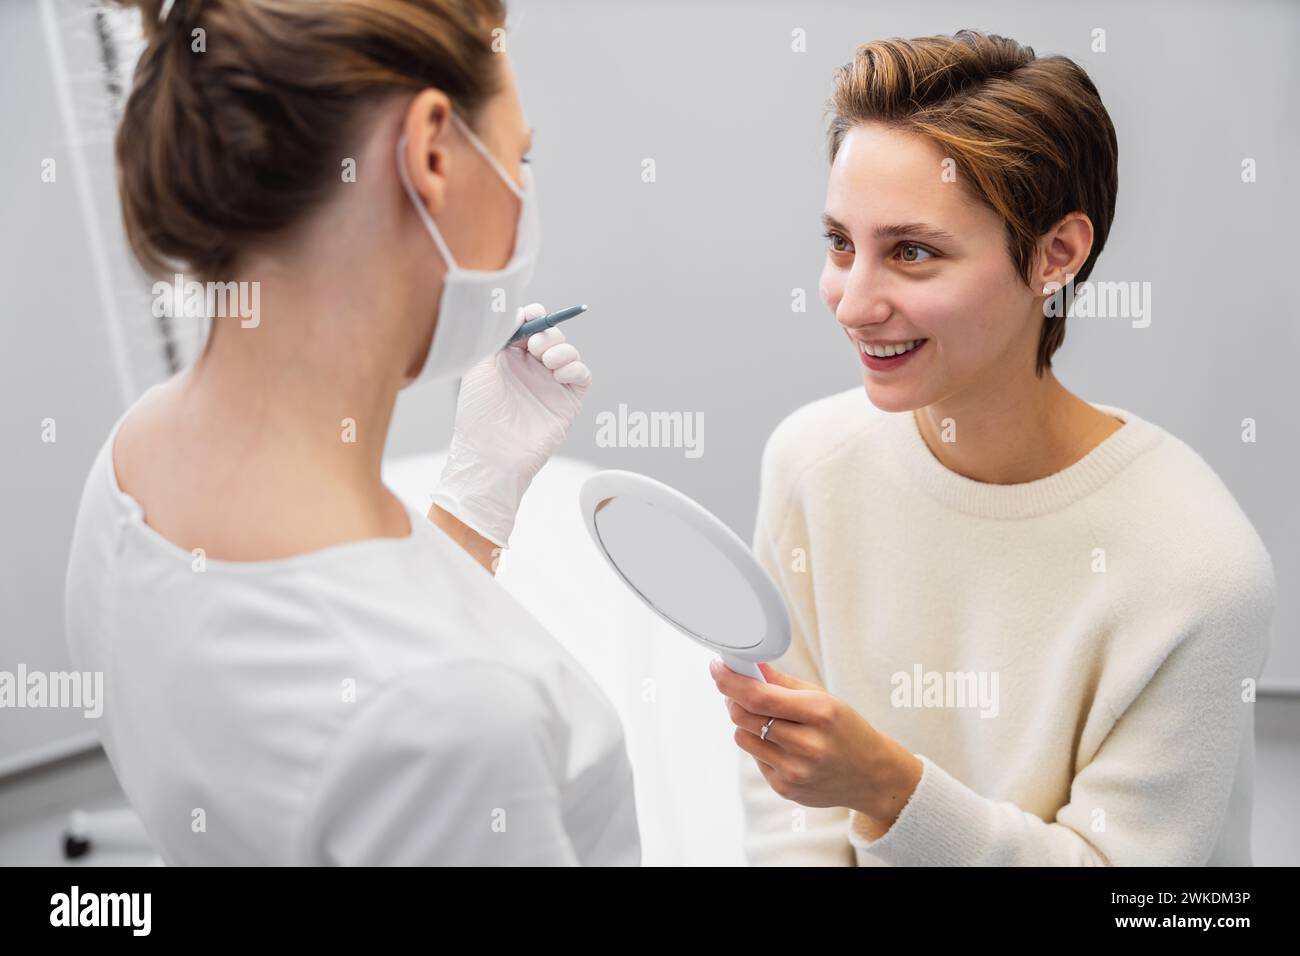 A young woman looks at her face after procedures in a beauty salon. Stock Photo